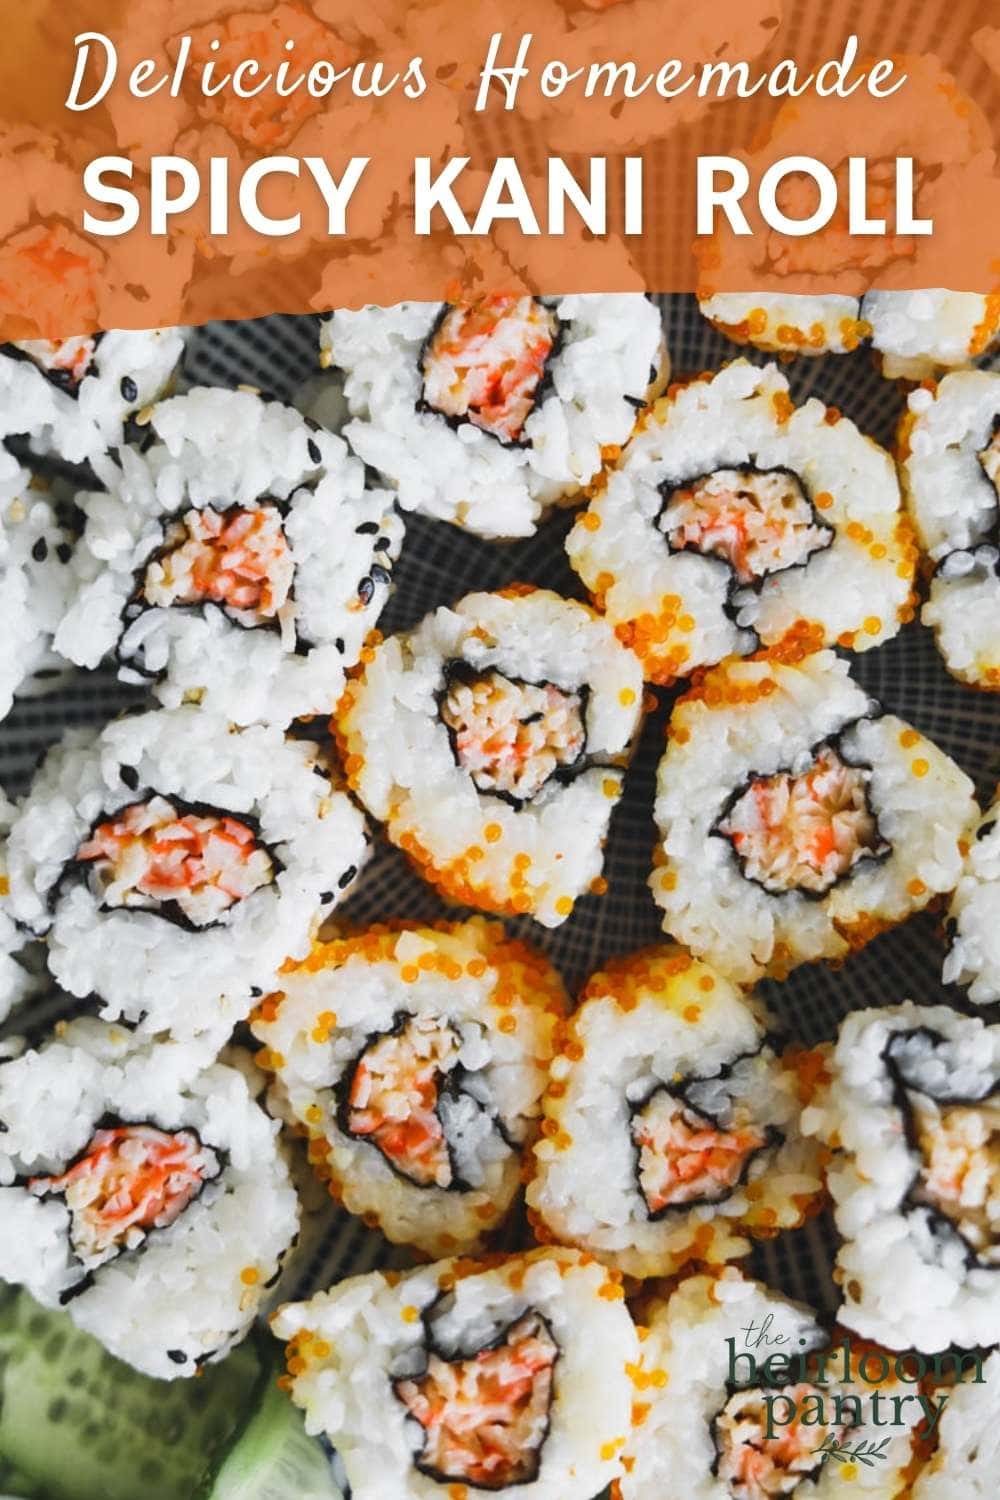 How to make a spicy kani roll Pinterest pin.